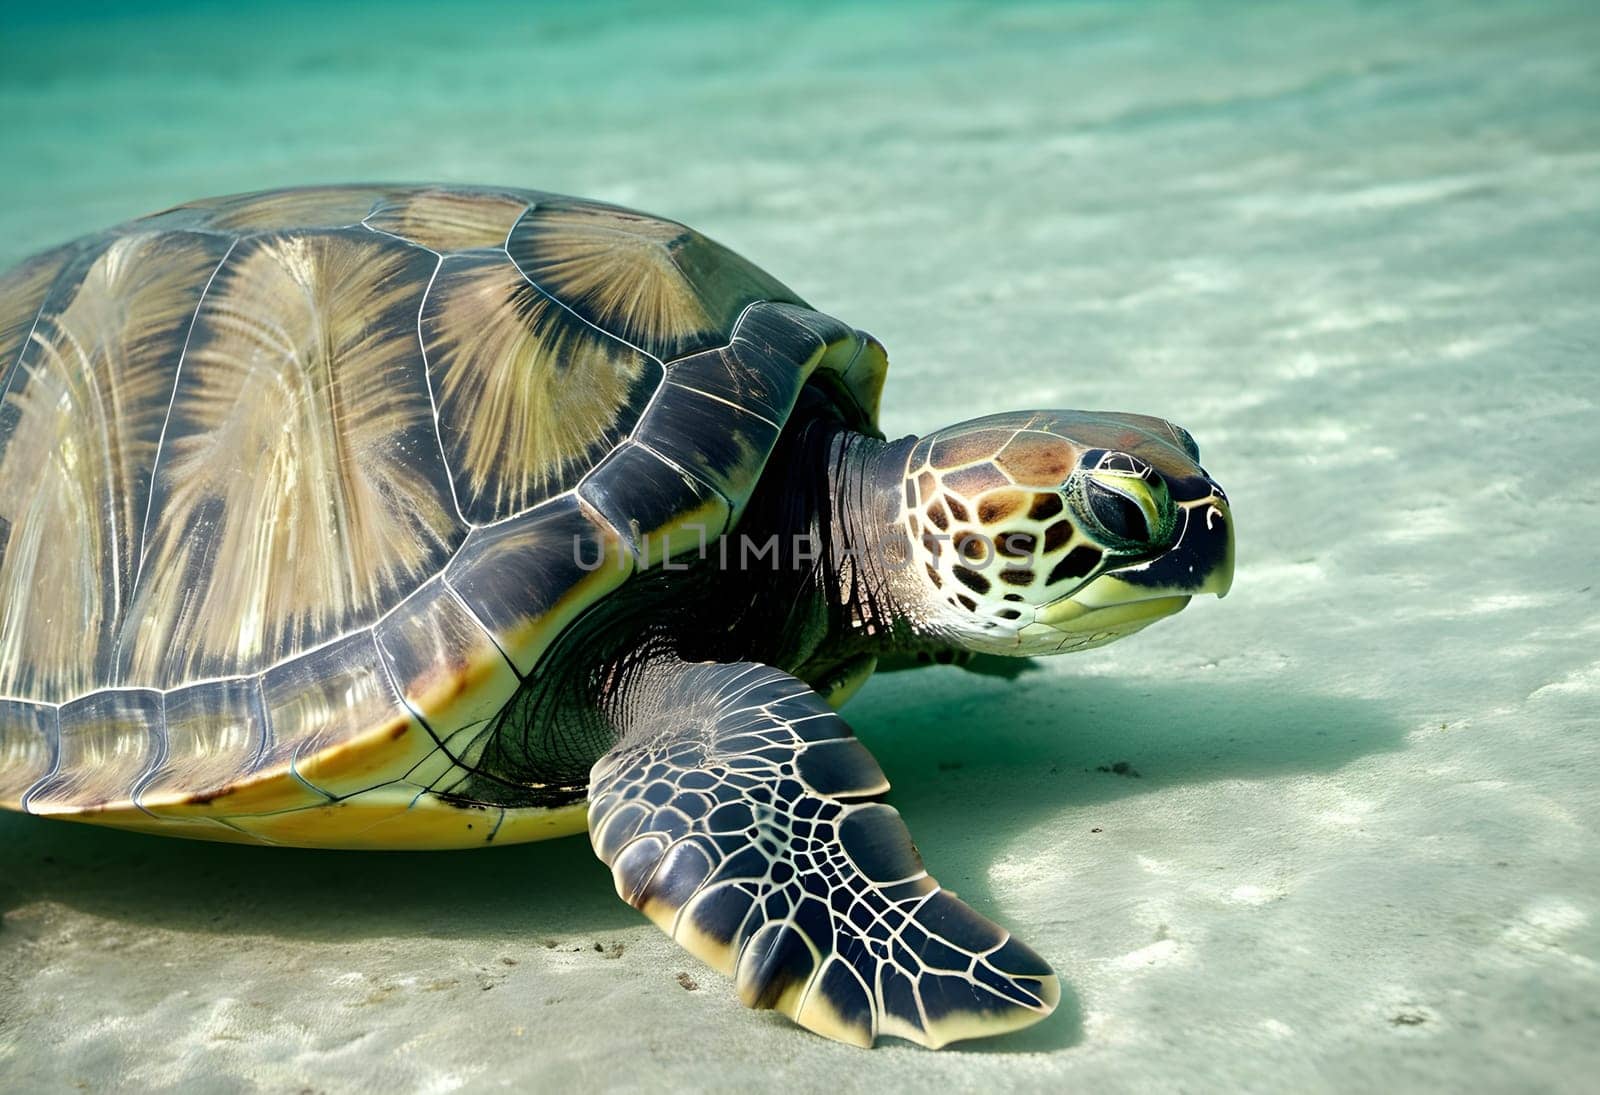 Aquatic Wonders: Discovering the Diversity of Turtle Life by Petrichor